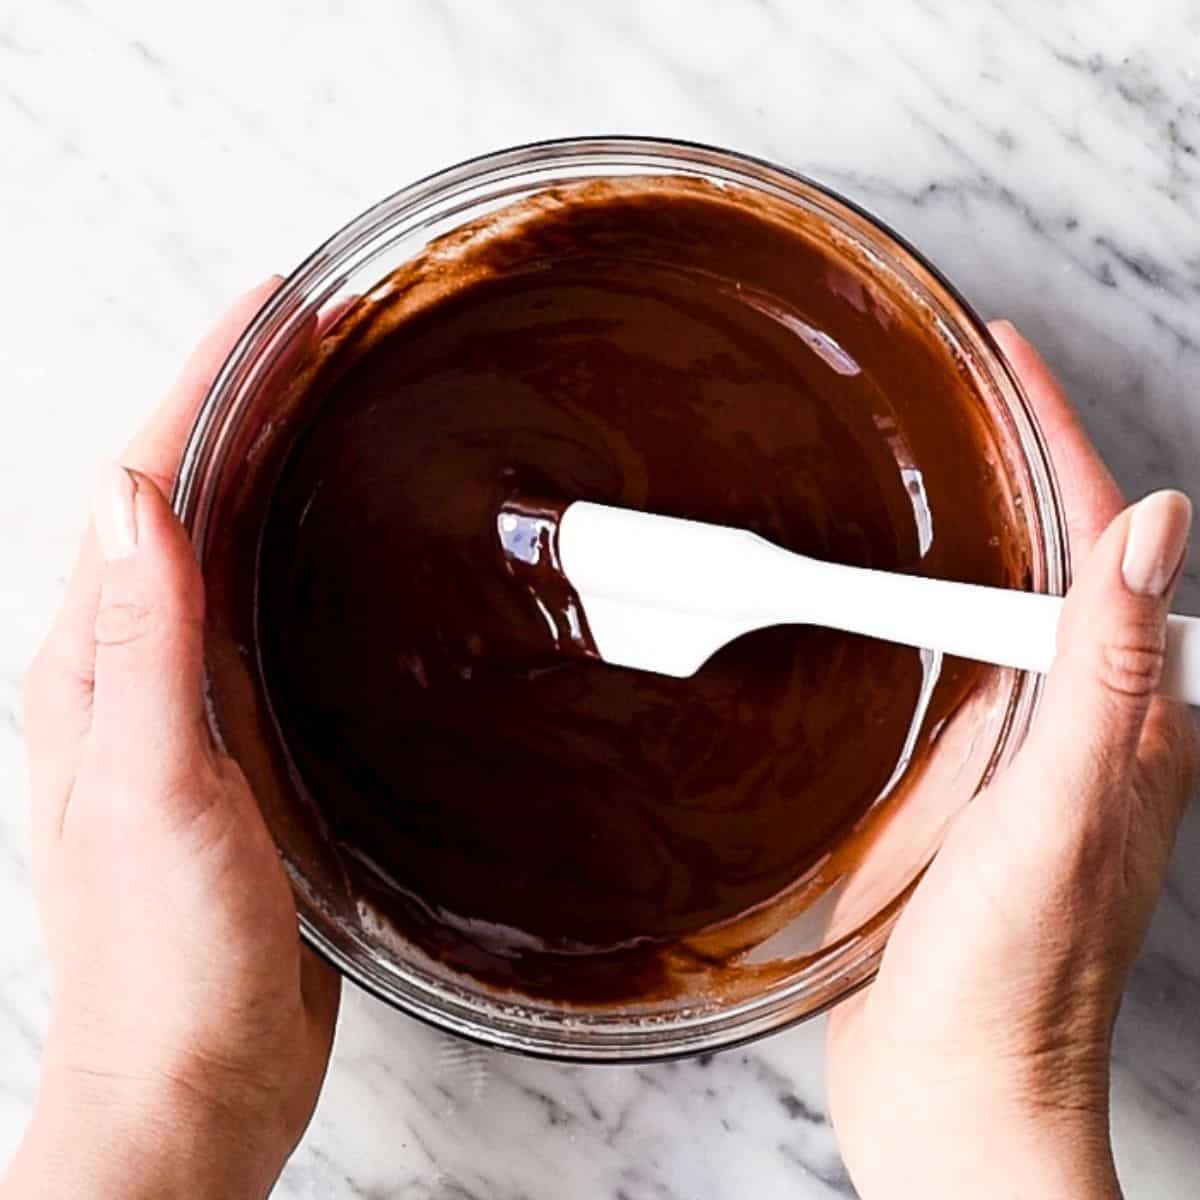 How to Make Flourless Brownies - melted chocolate & butter in a glass bowl with a white spatula